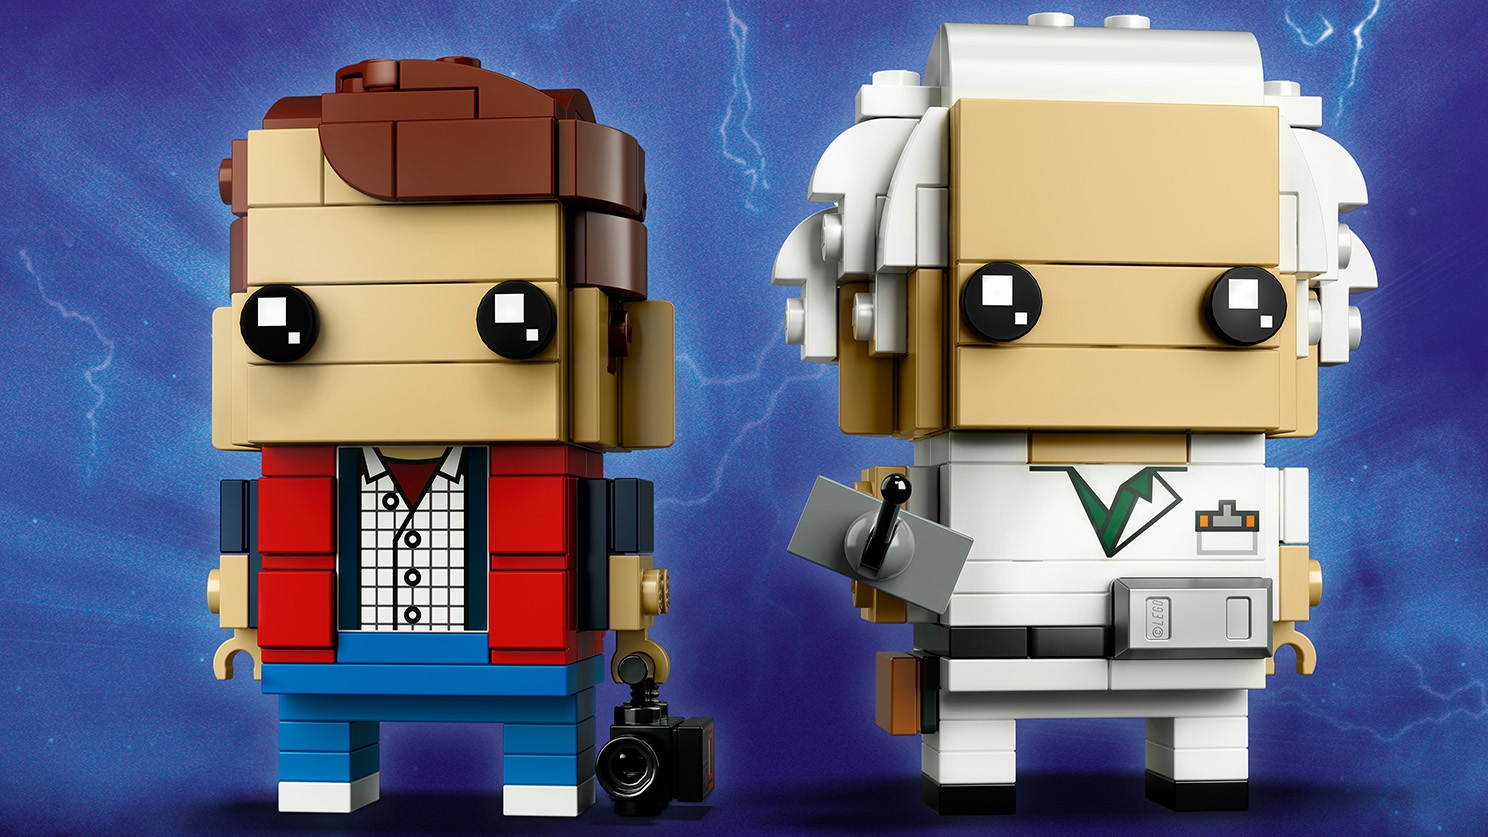 LEGO Brickheadz - 41611 Marty McFly & Doc Brown - Build these two characters from the Back to the Future movie and display them on their individual baseplates.